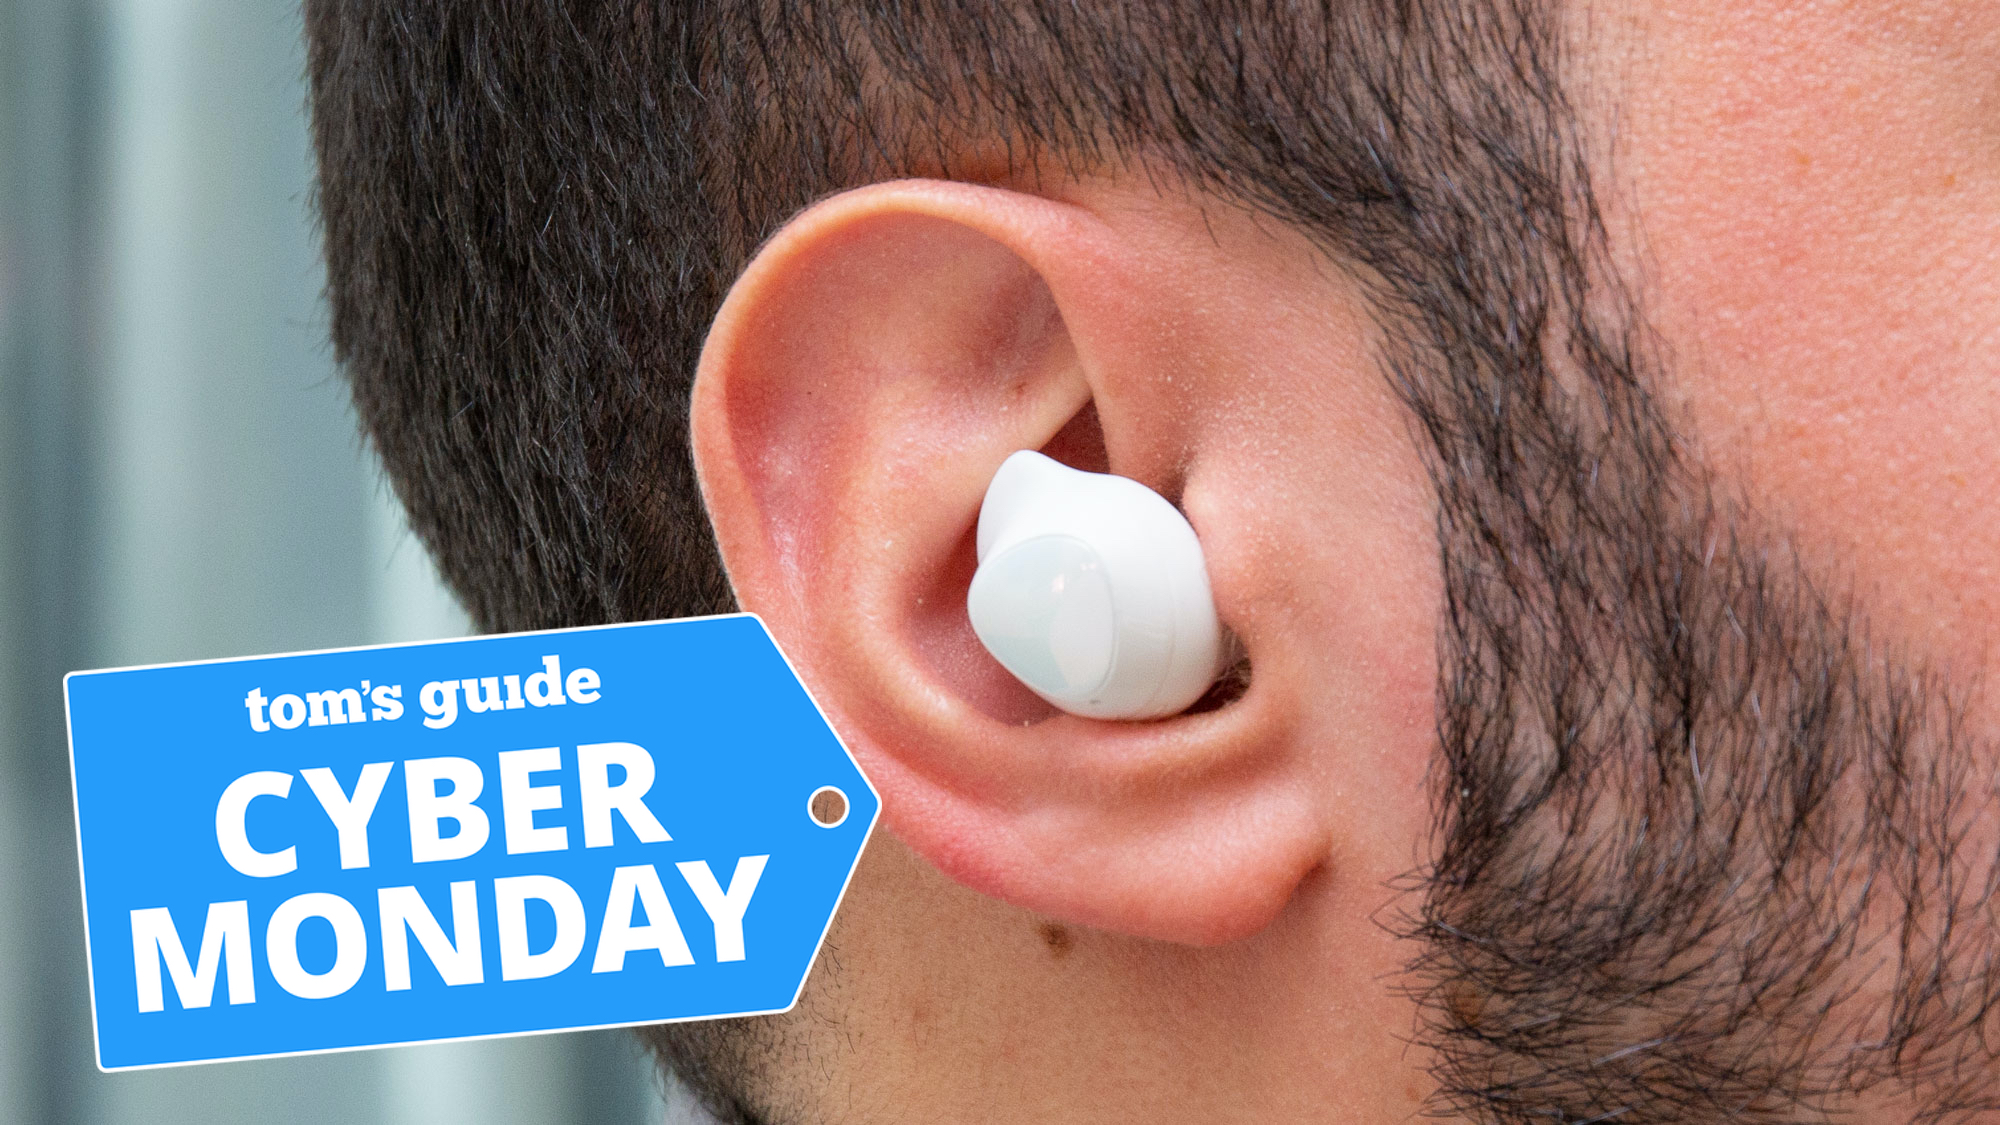 Galaxy Buds Plus in the ear of a man, with Cyber Monday badge in image.